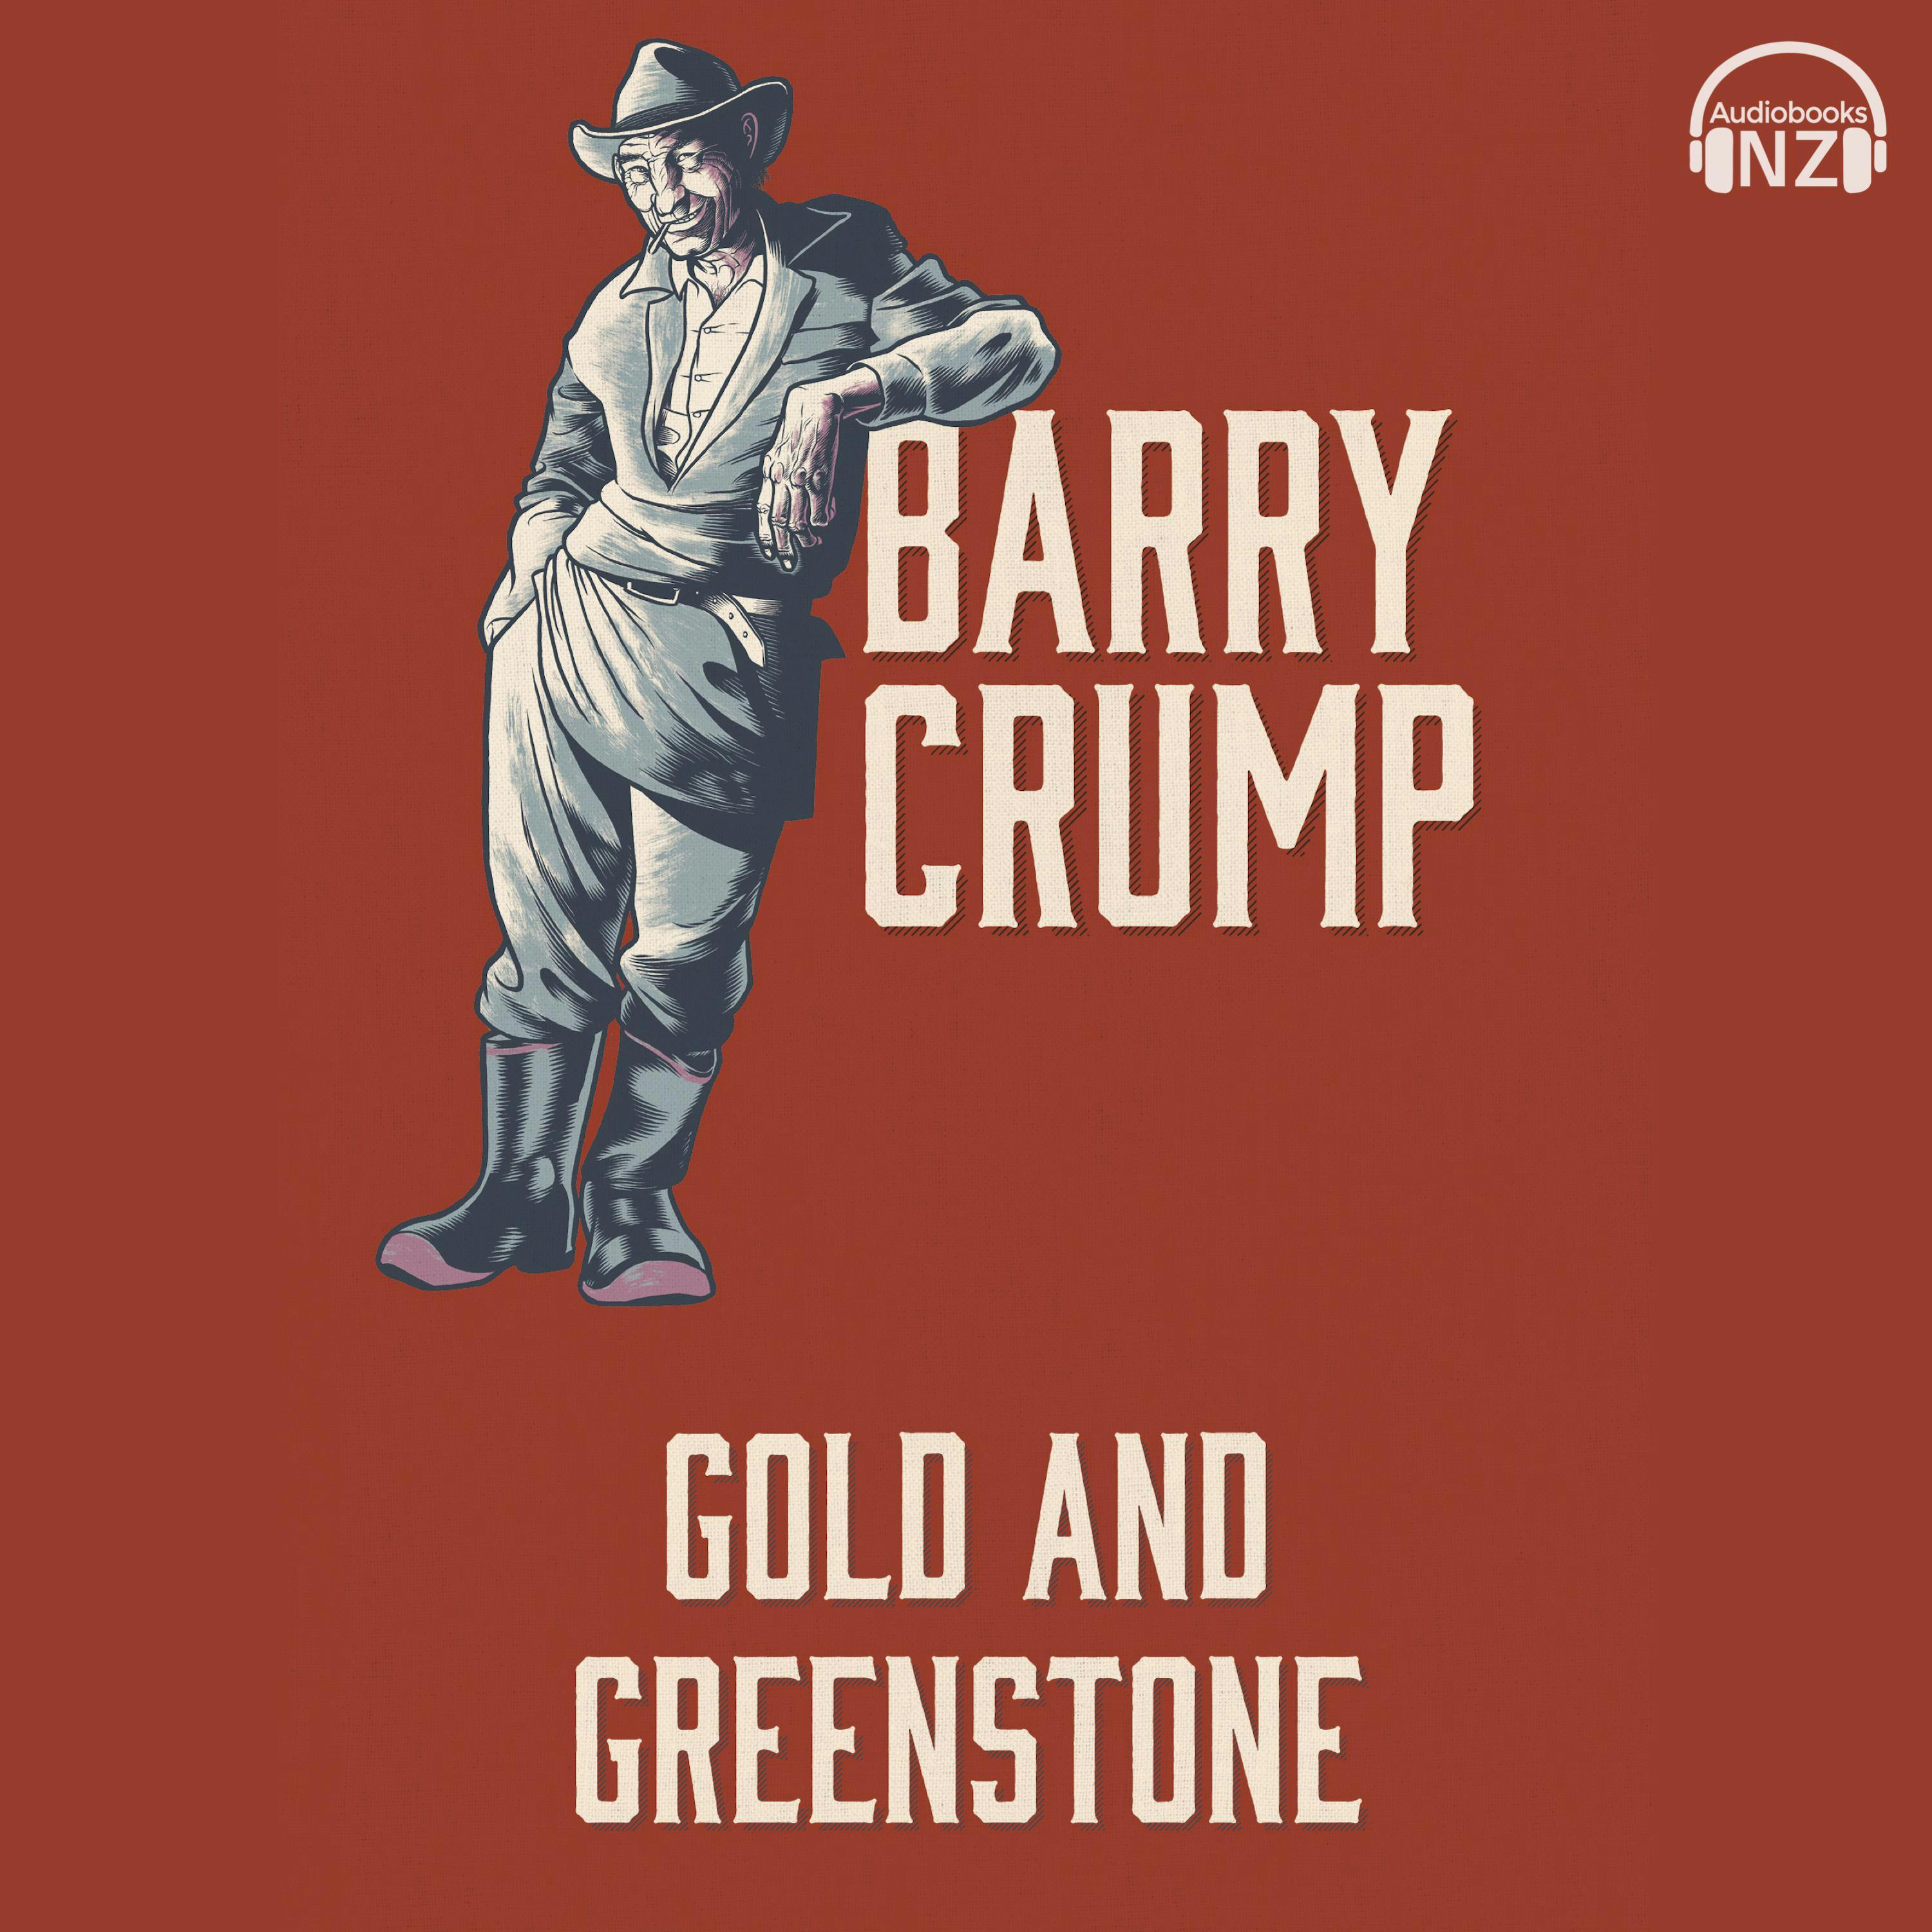 Gold and Greenstone: Barry Crump Collected Stories Book 3 - Barry Crump